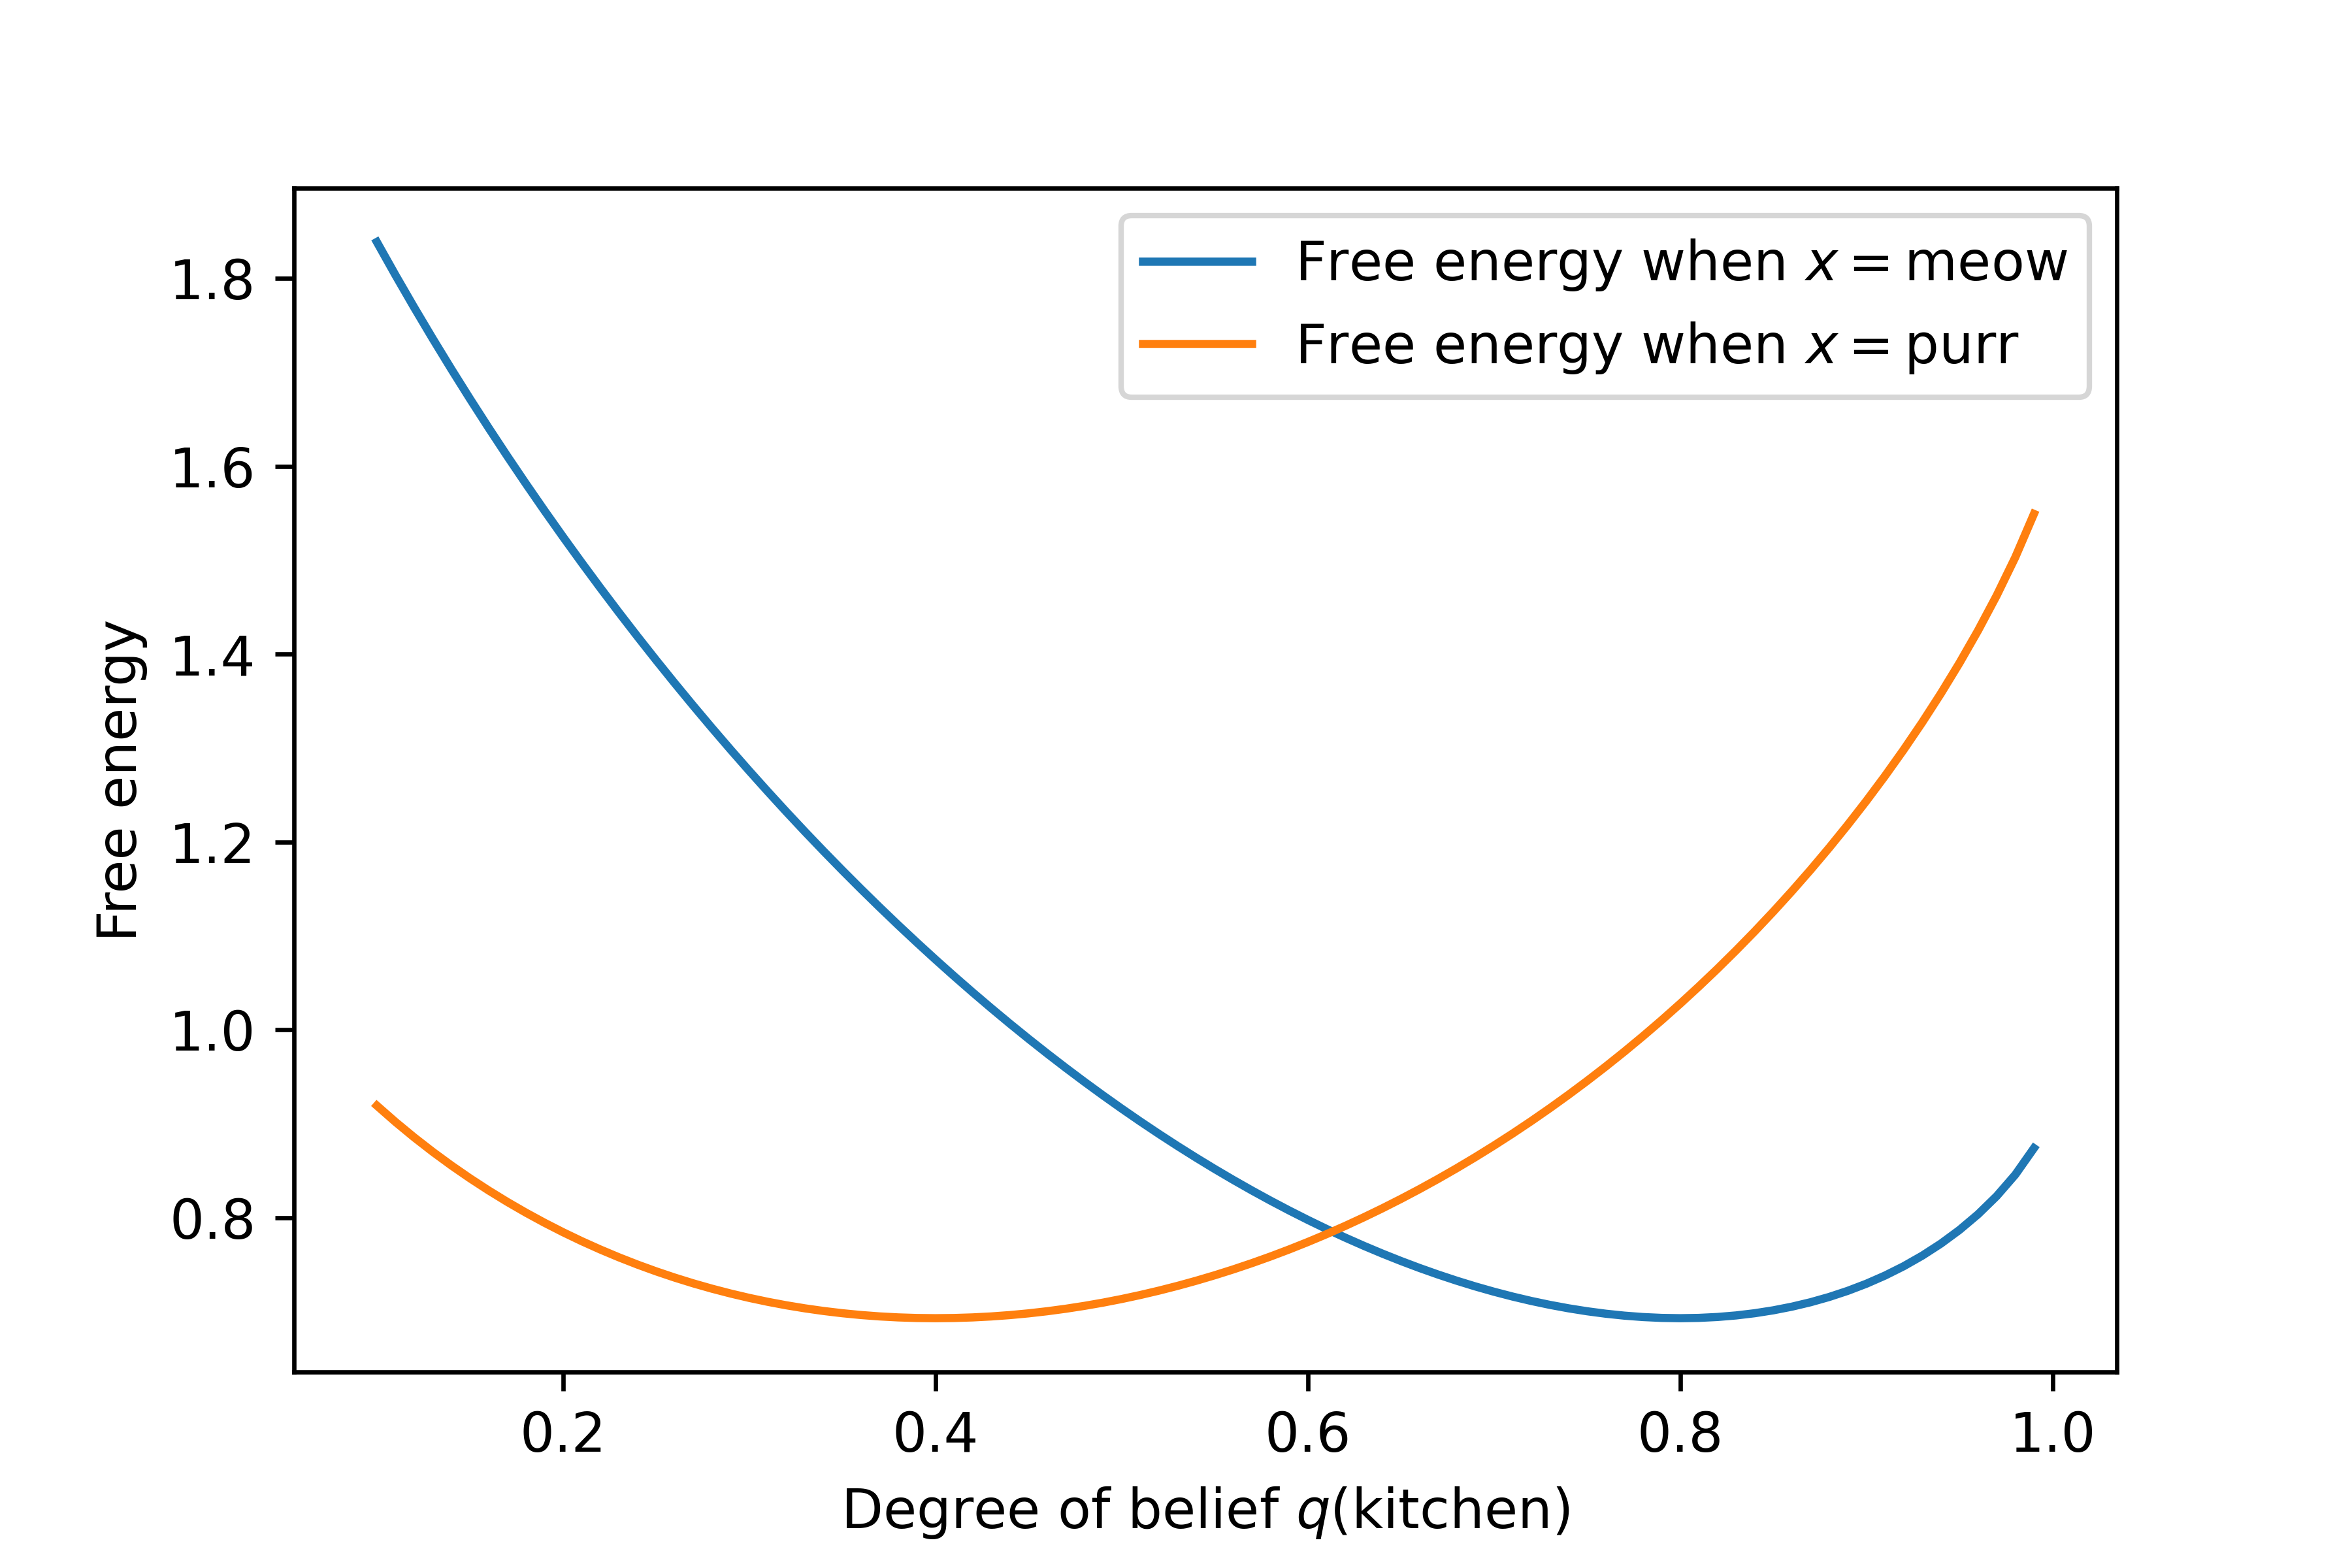 Free energy as a function of the degree of belief that the cat is in the kitchen, for both meow and purr